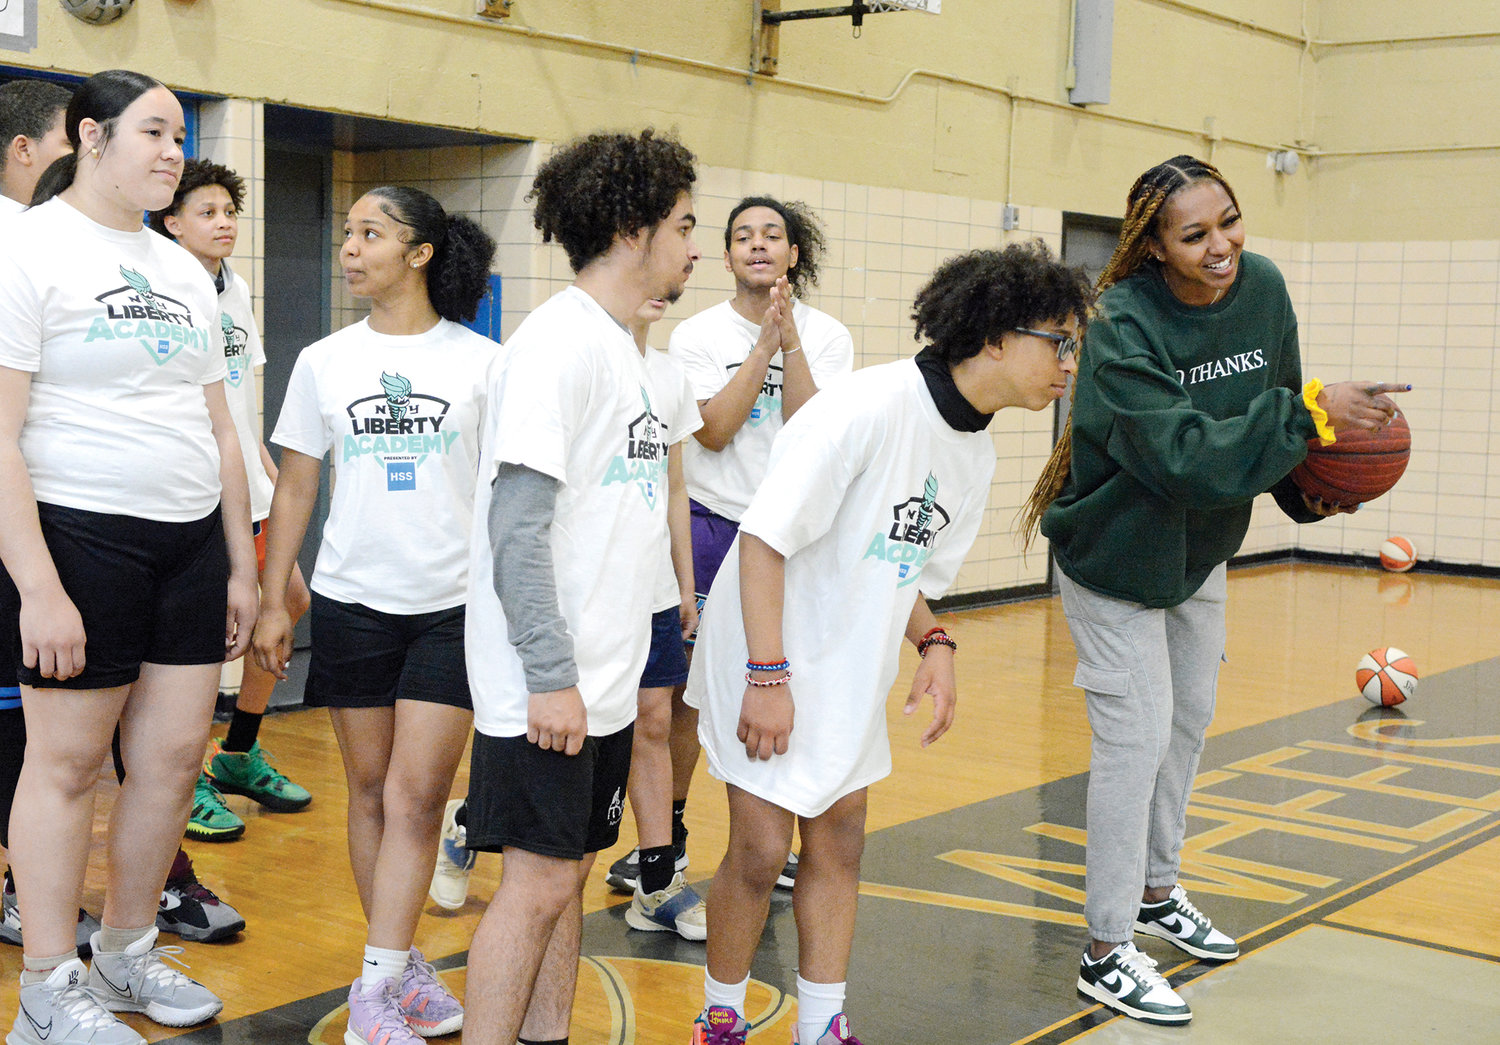 DiDi Richards of the WNBA’s New York Liberty instructs players at Catholic Charities’ Saturday Night Lights youth basketball clinic at La Plaza Beacon School in Manhattan April 9.